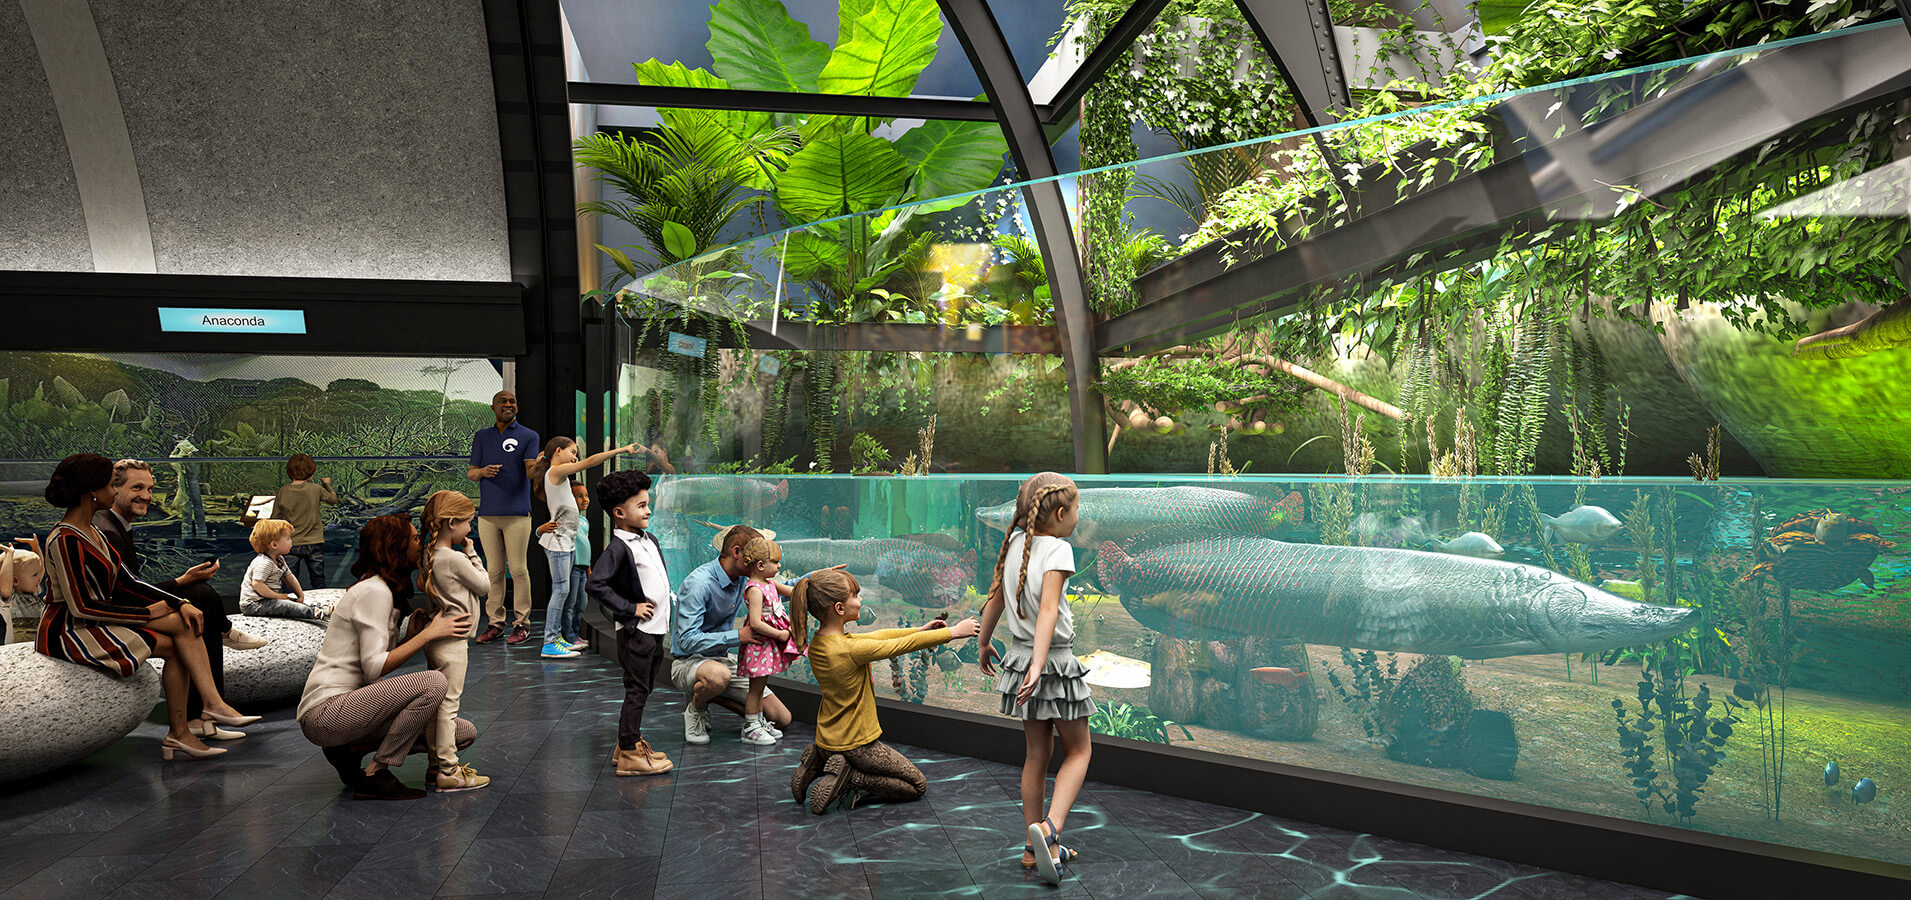 rendering of kids and parents observing an aquarium habitat featuring a very large fish